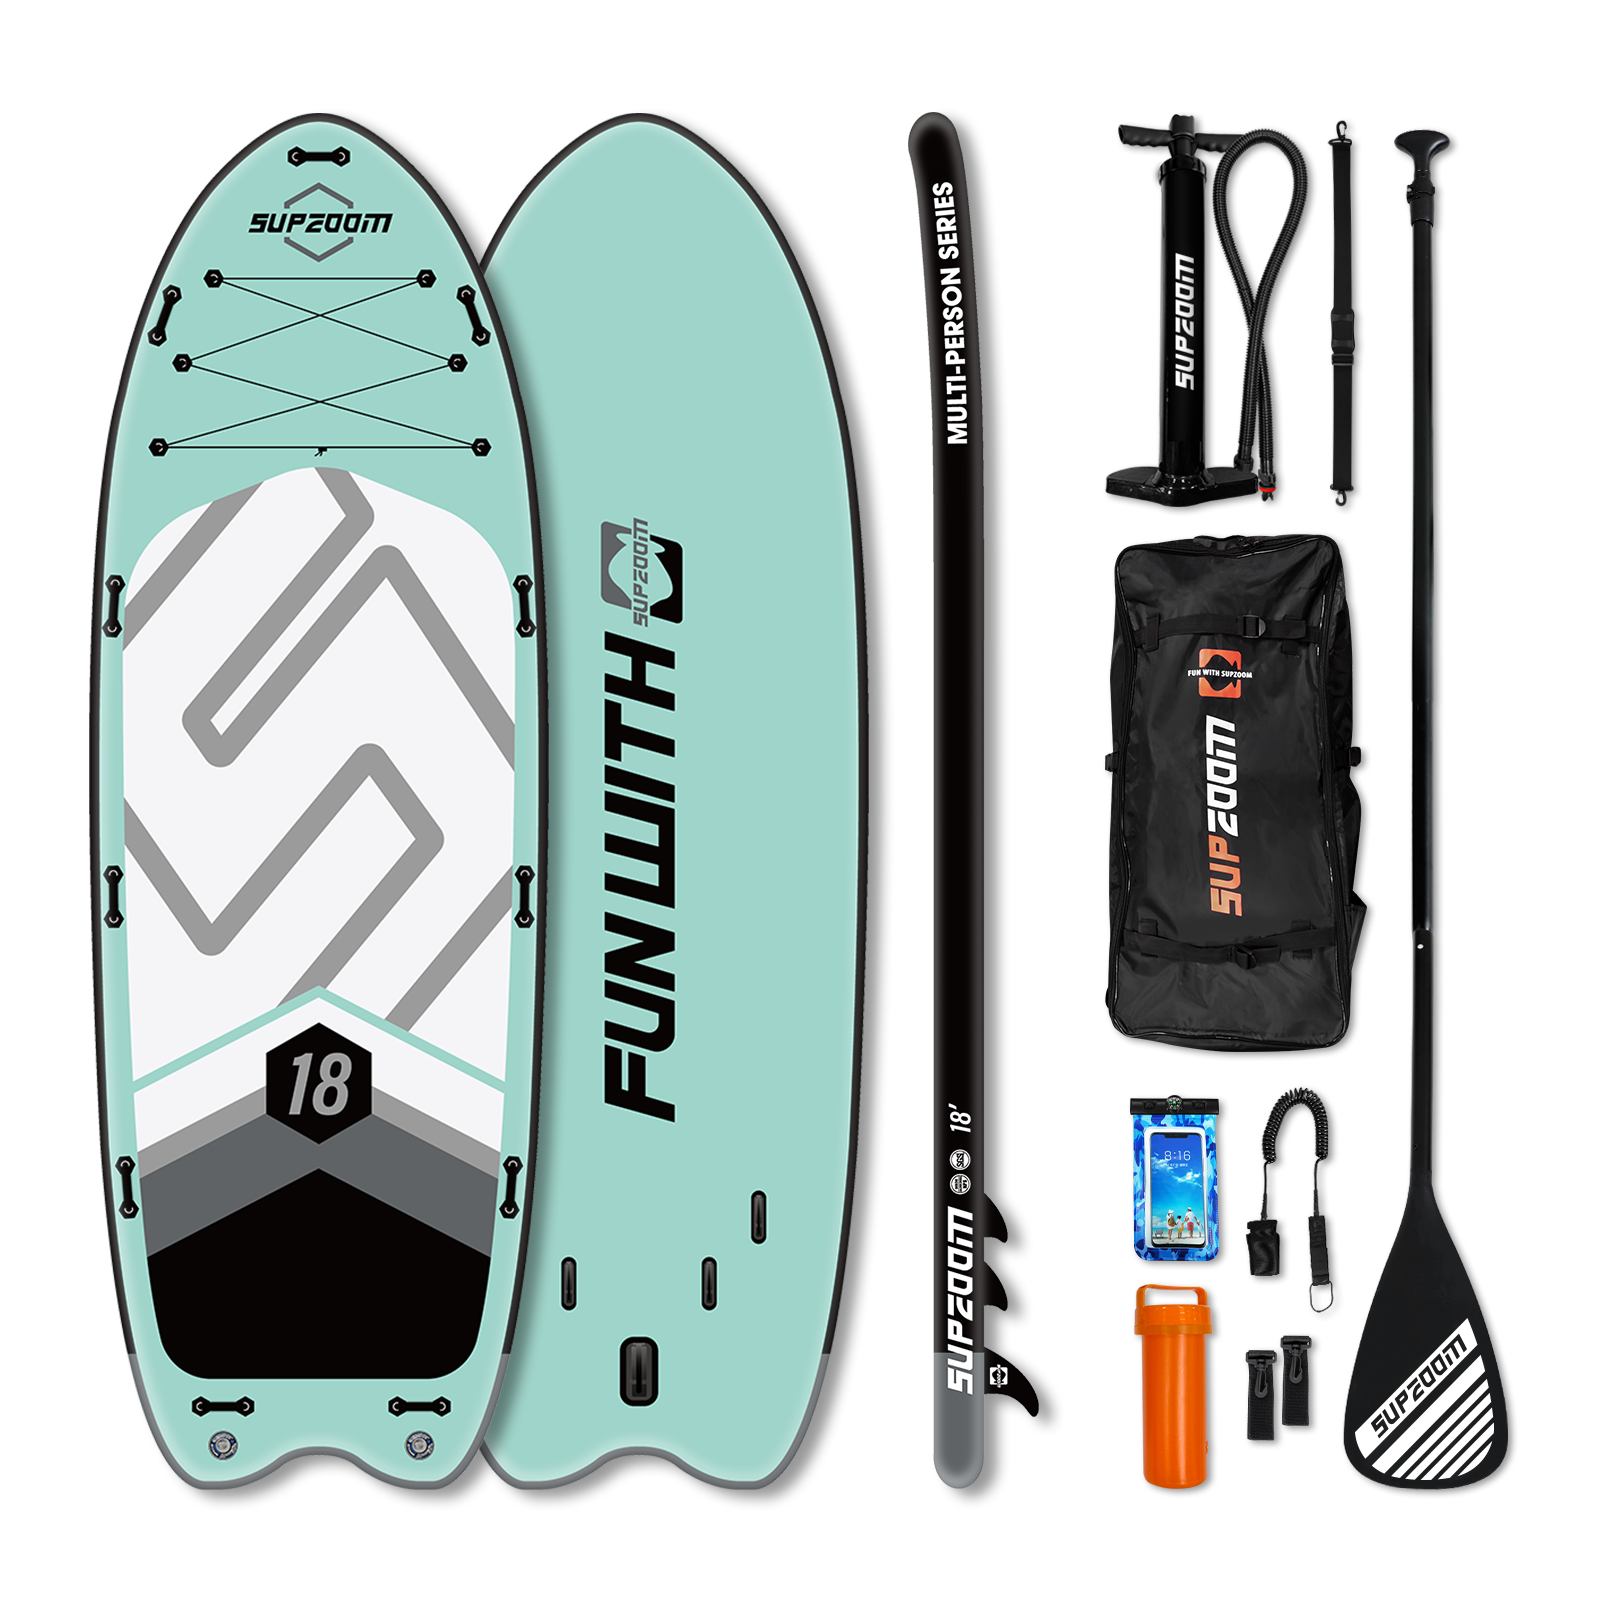 18' MULTI-PERSON Stand up paddle board with accessories